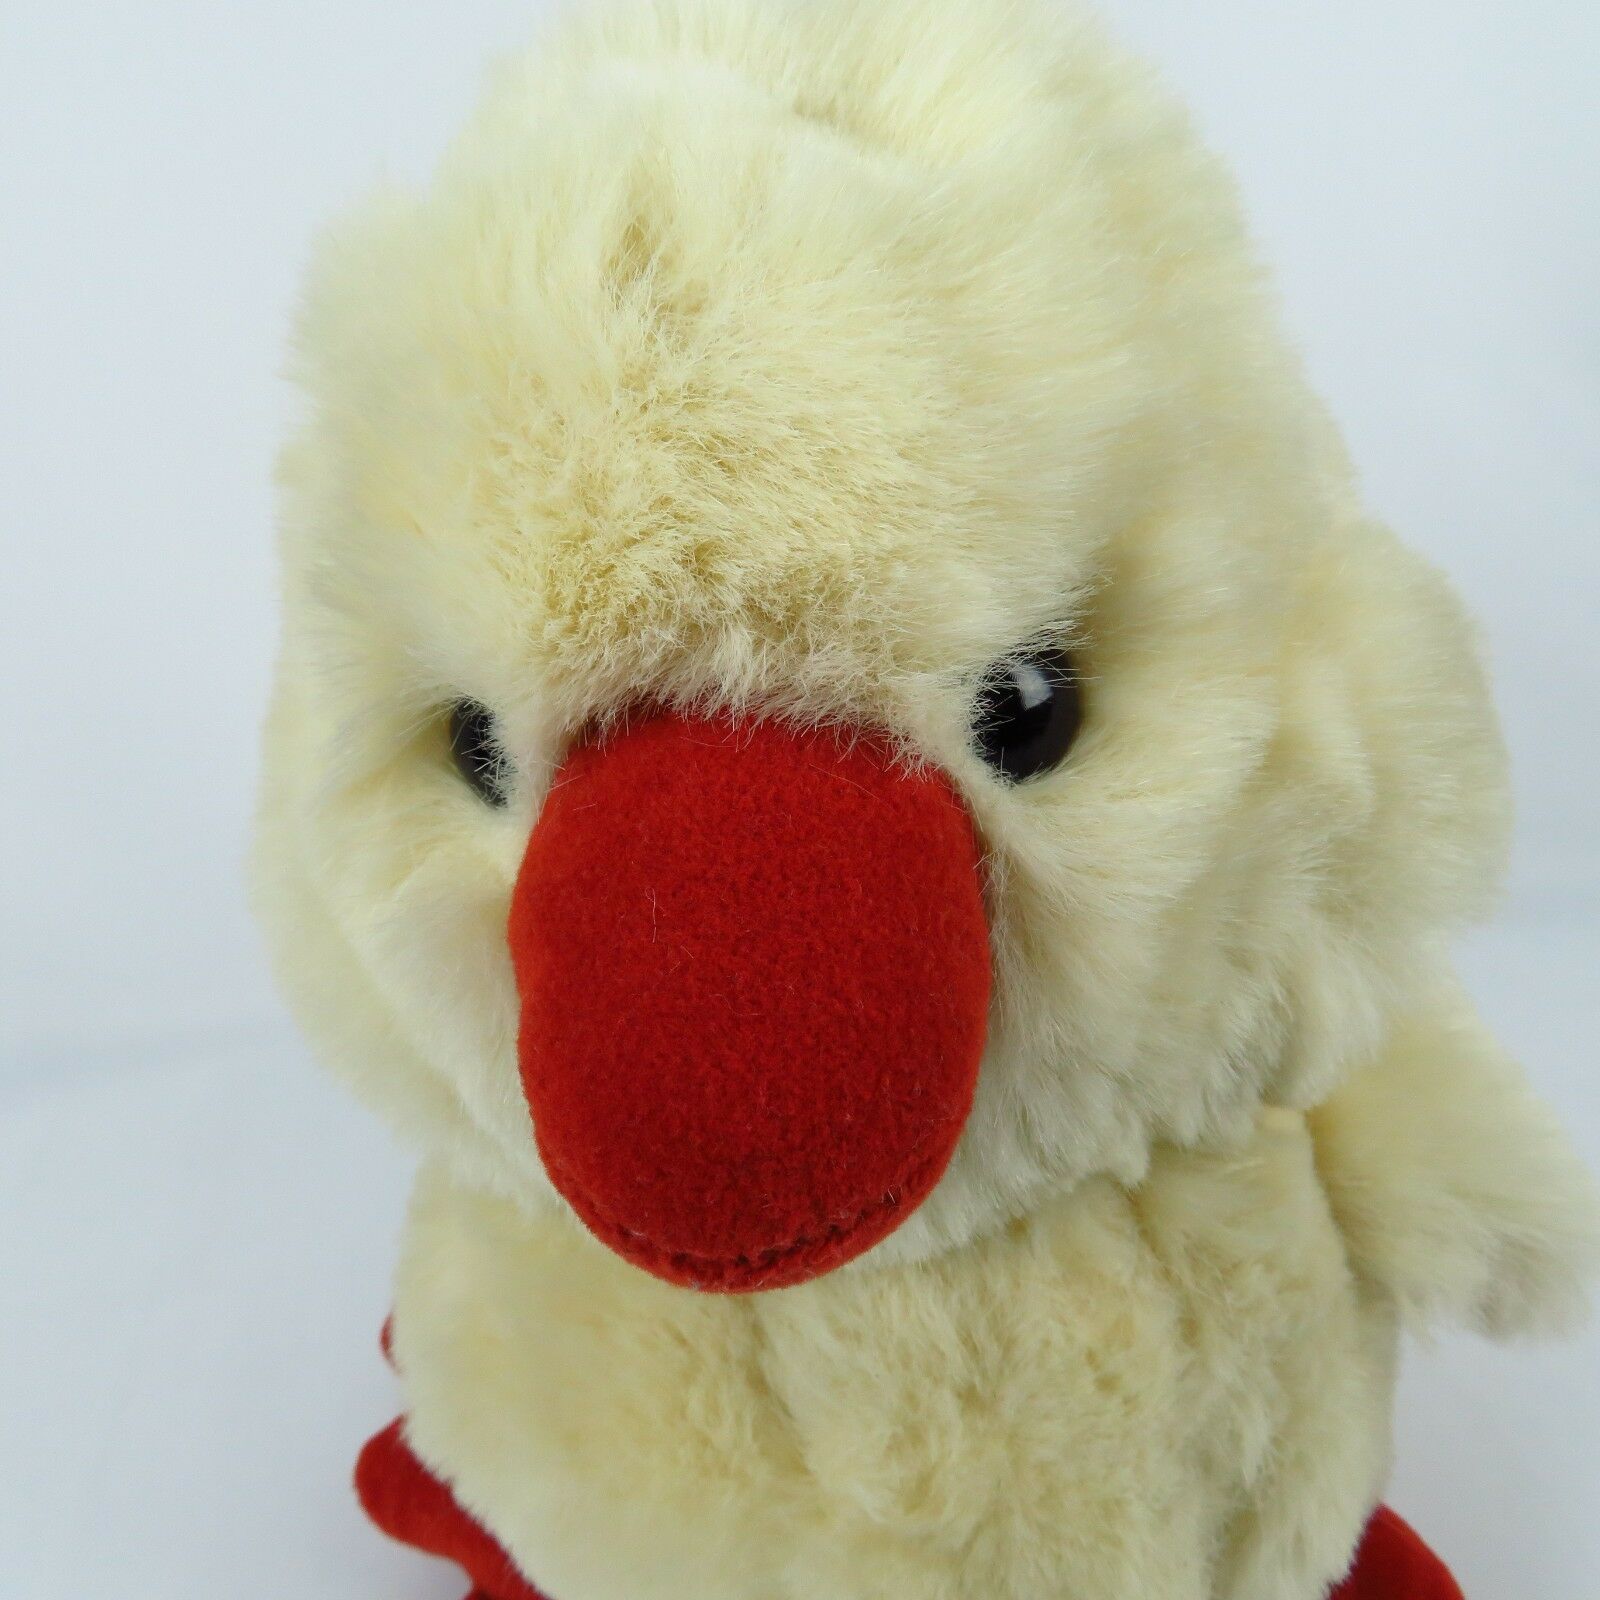 Vintage Chick Chicken Plush Stuffed Animal Easter Toy Doll PMS UK Imports - At Grandma's Table